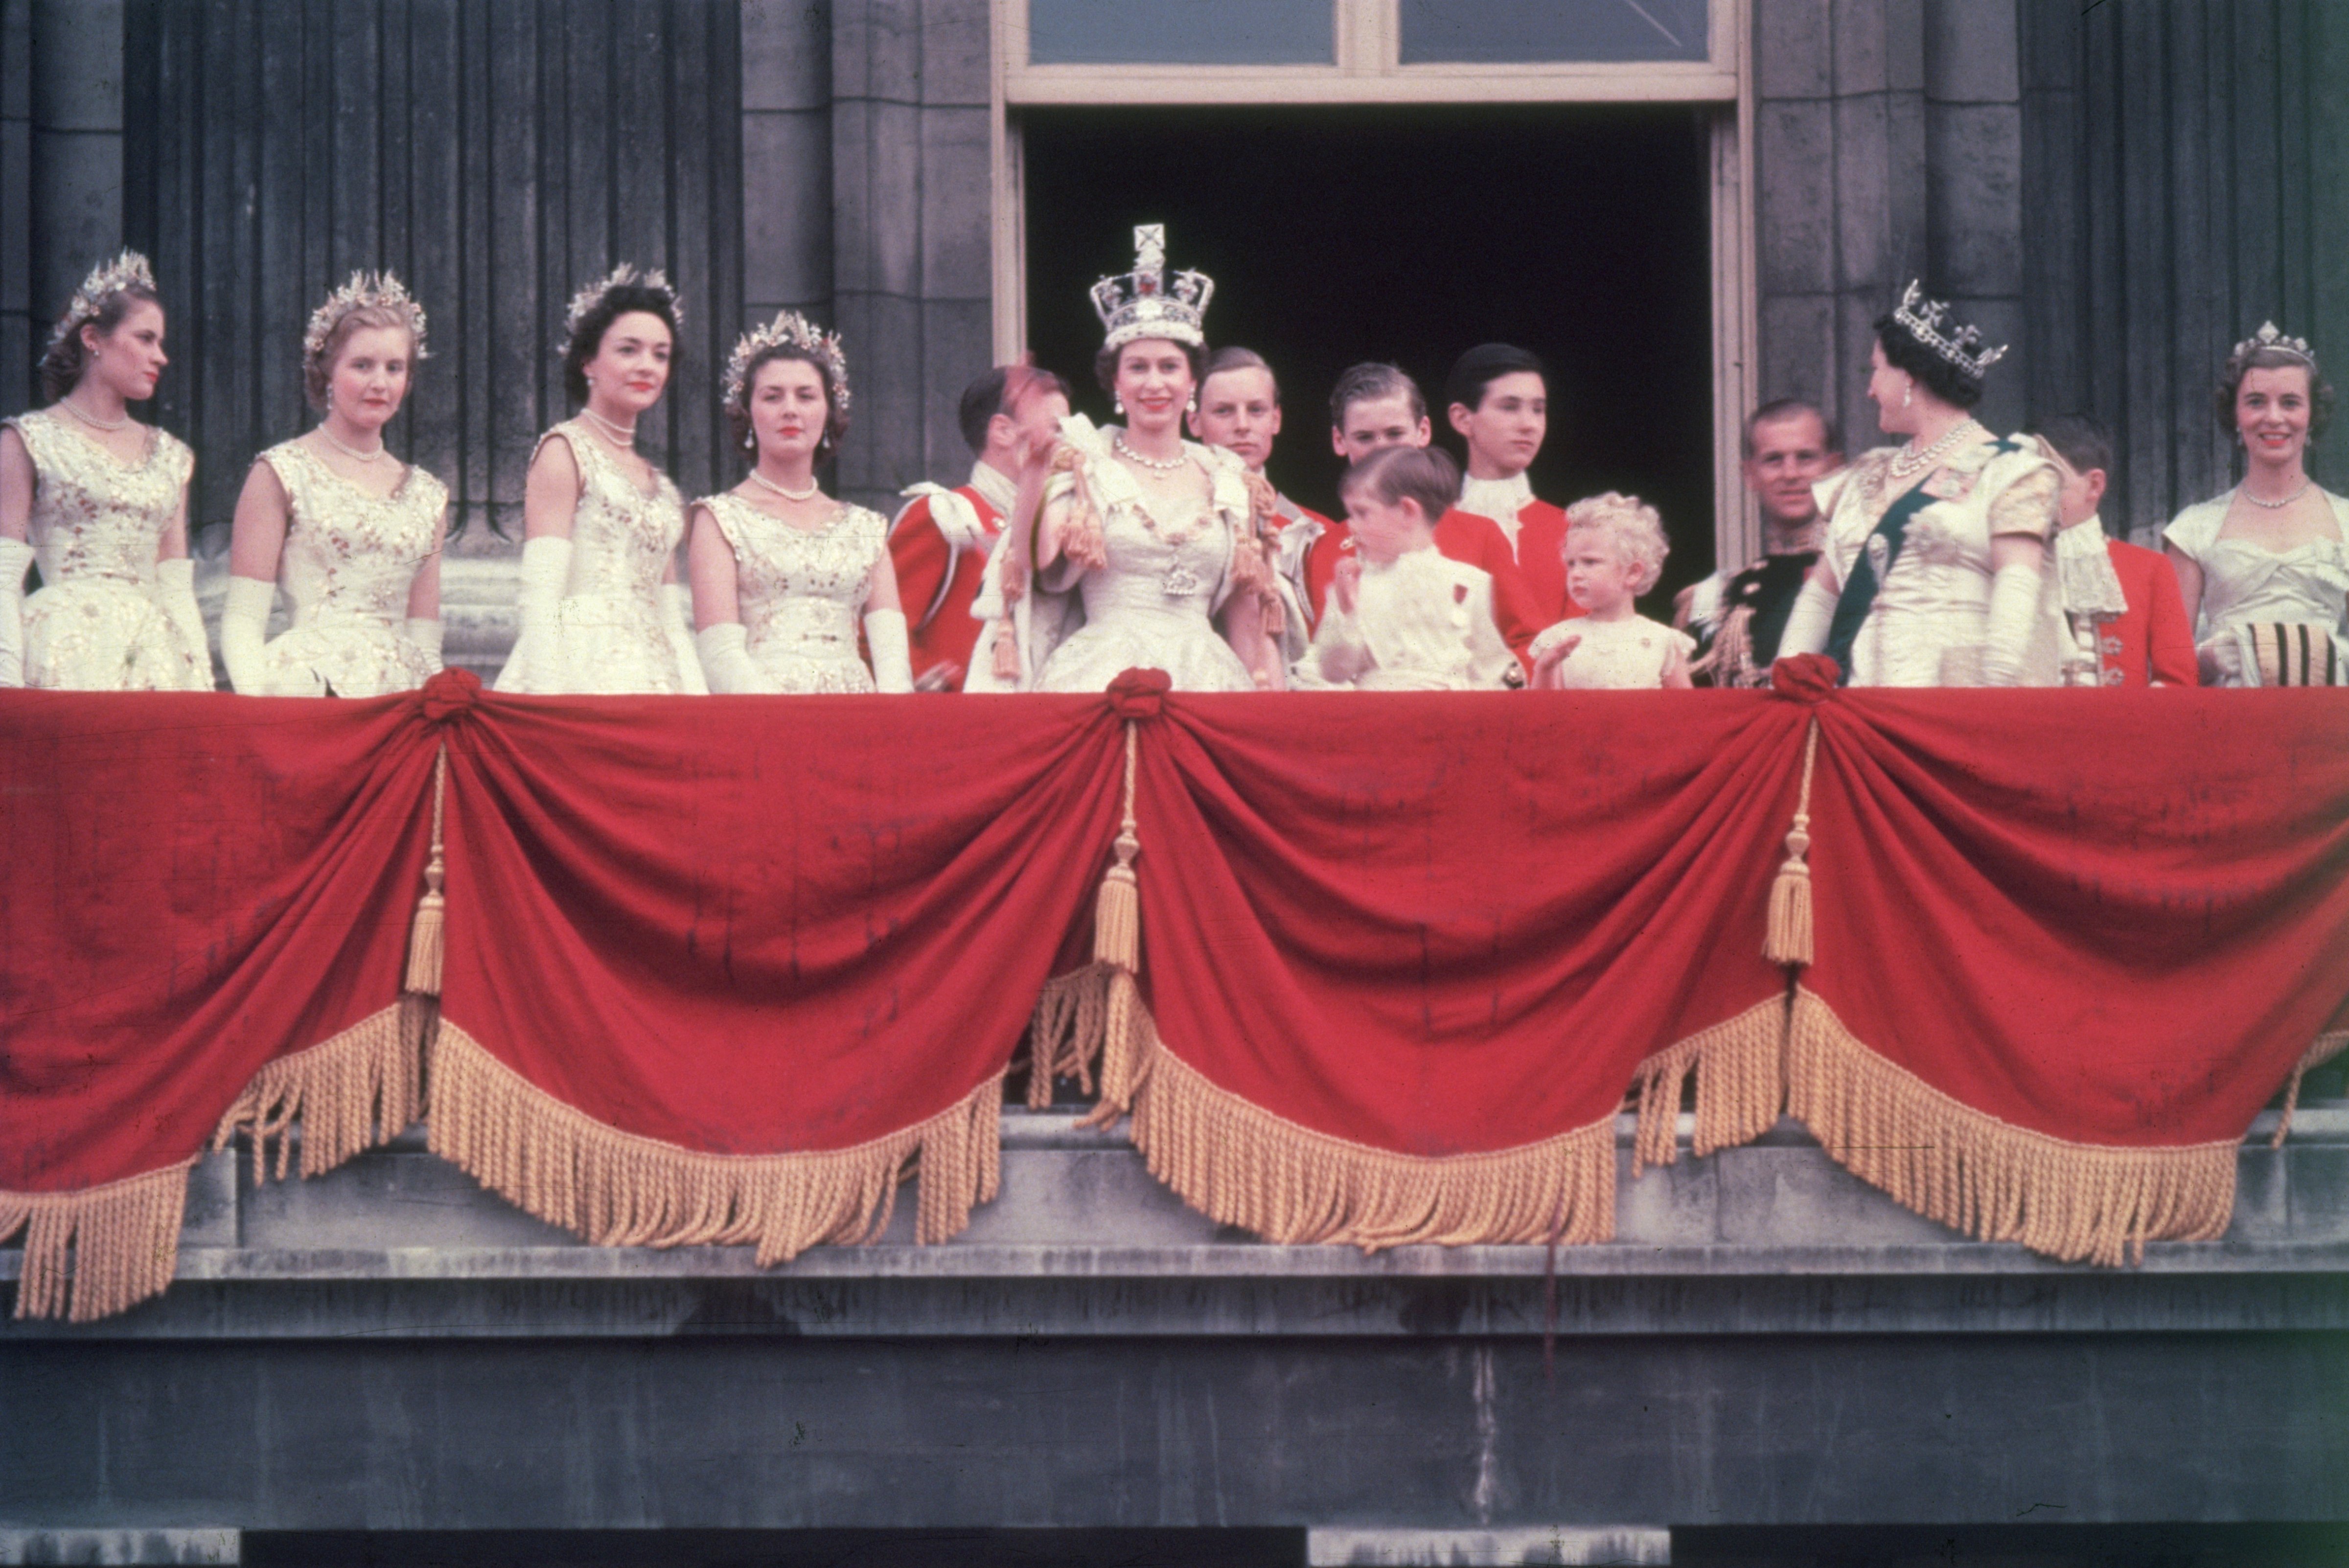 The newly crowned Queen Elizabeth II waves to the crowd from the balcony at Buckingham Palace on June 2, 1953. Her children Prince Charles and Princess Anne stand with her. (Hulton Archive&mdash;Getty Images)